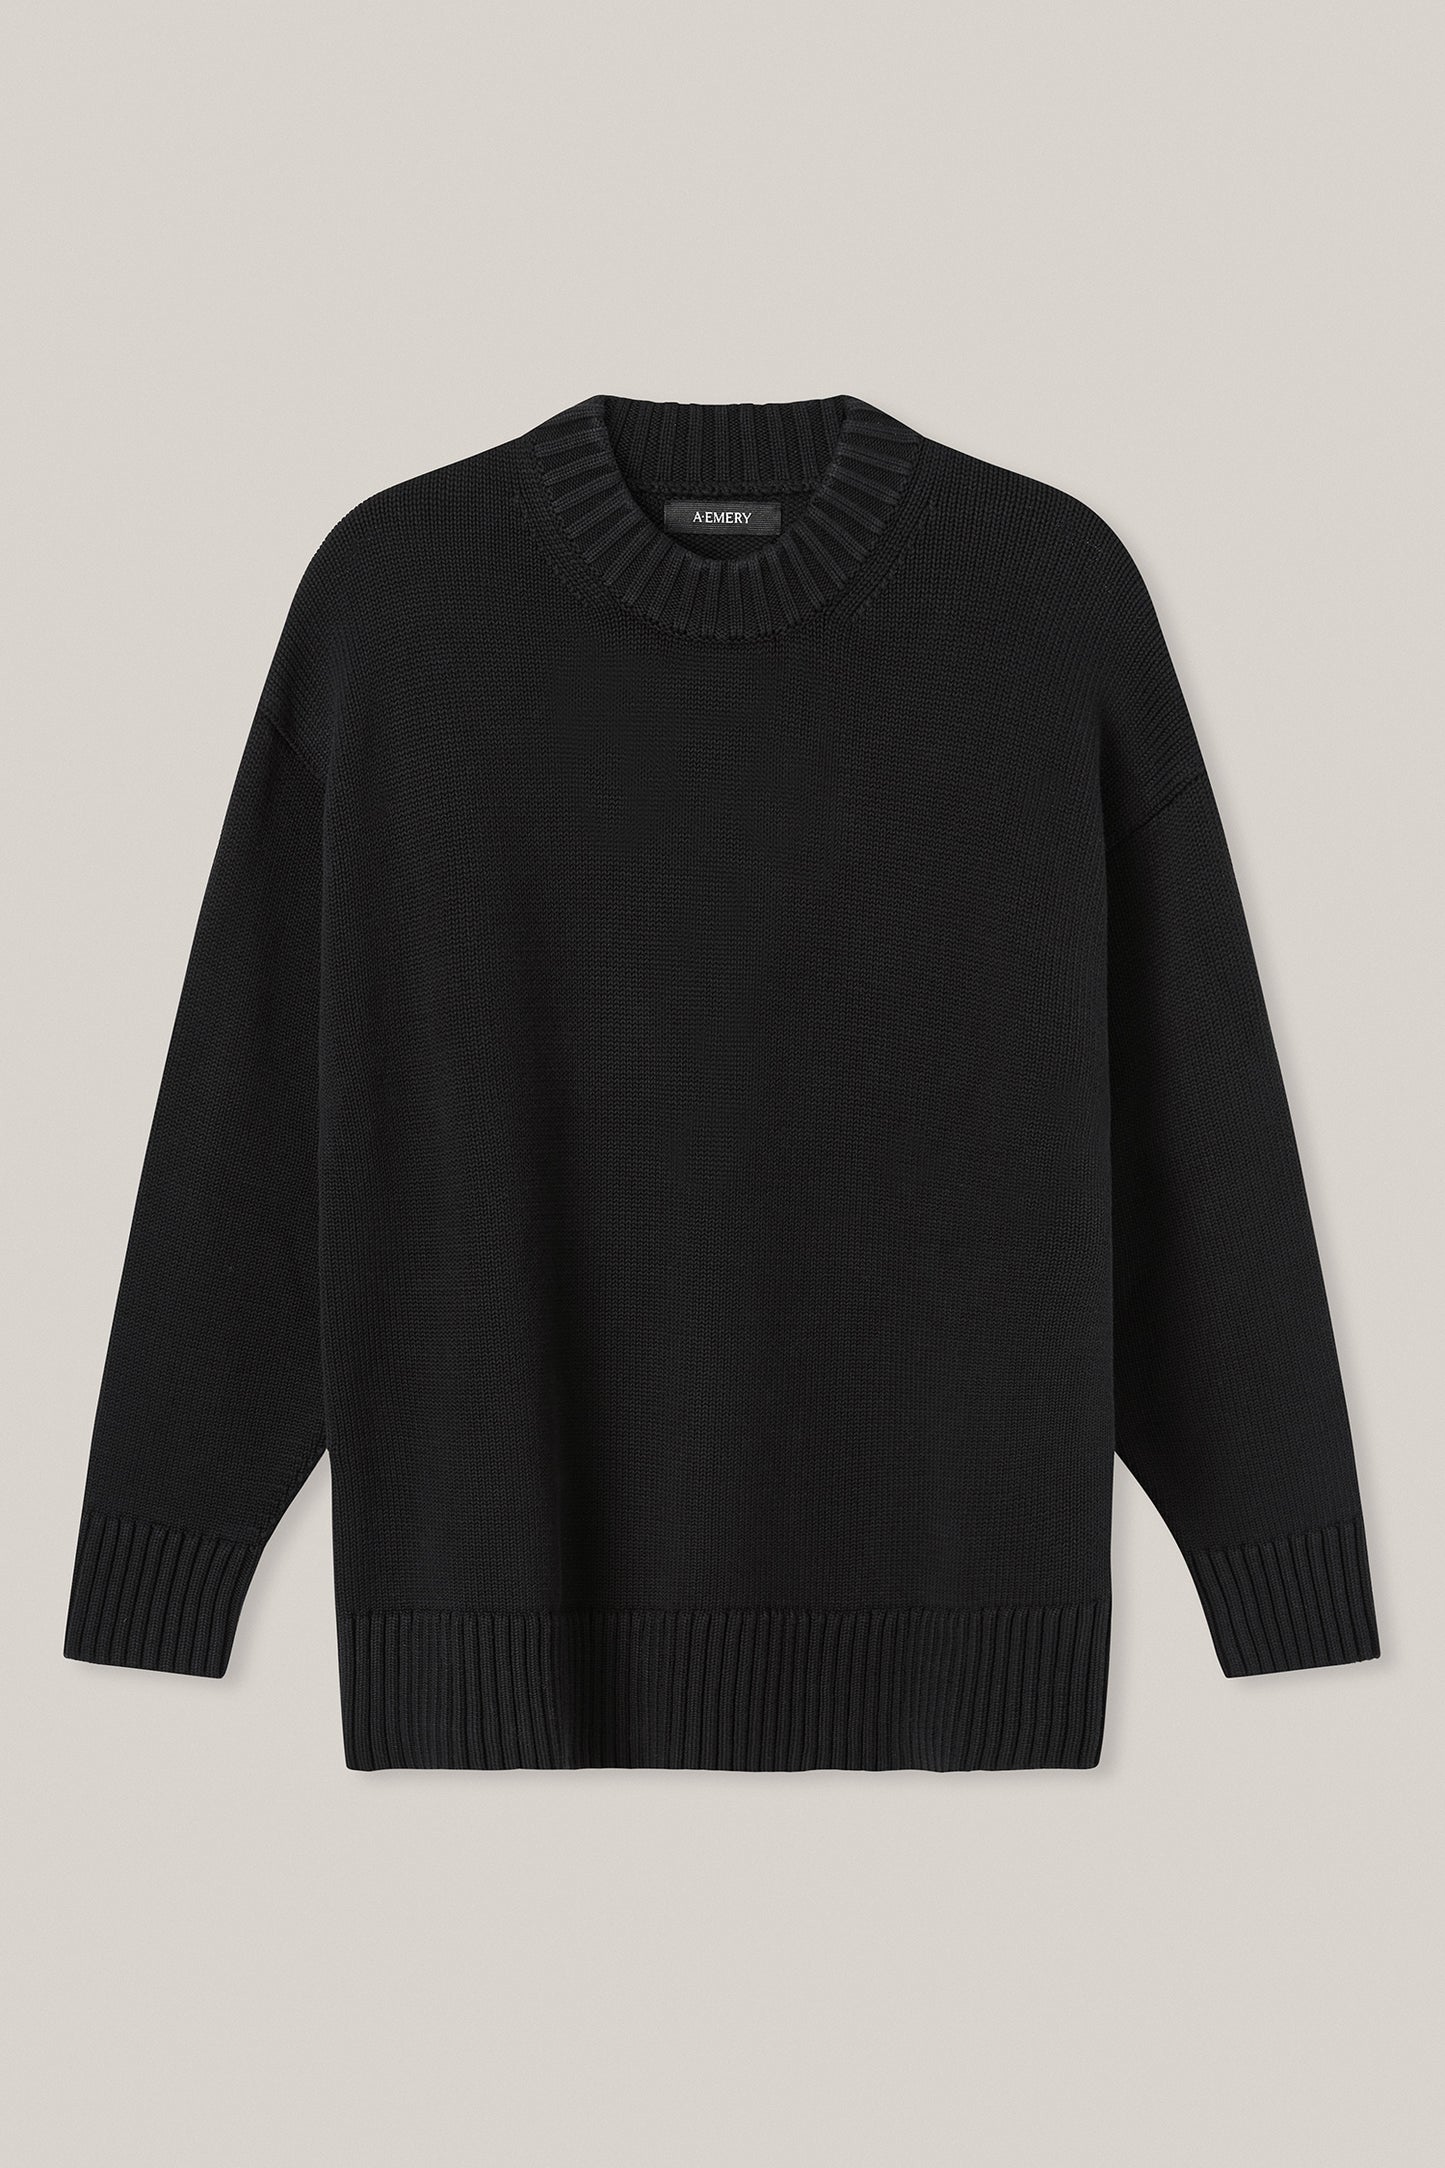 The Orson Knit